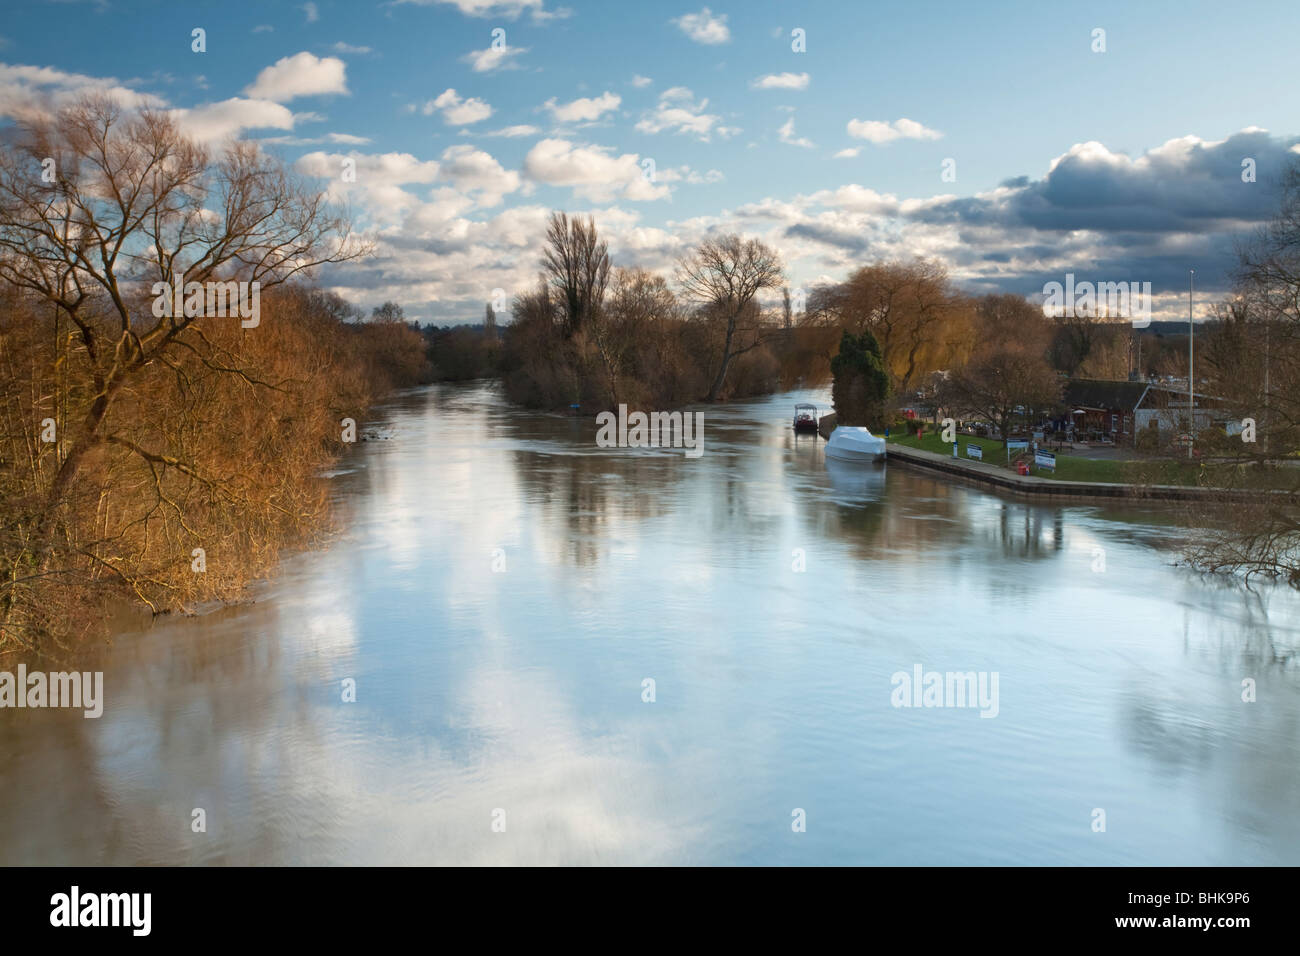 Queen's Eyot and Bray Marina from footbridge over the River Thames, Bray, Berkshire, Uk Stock Photo